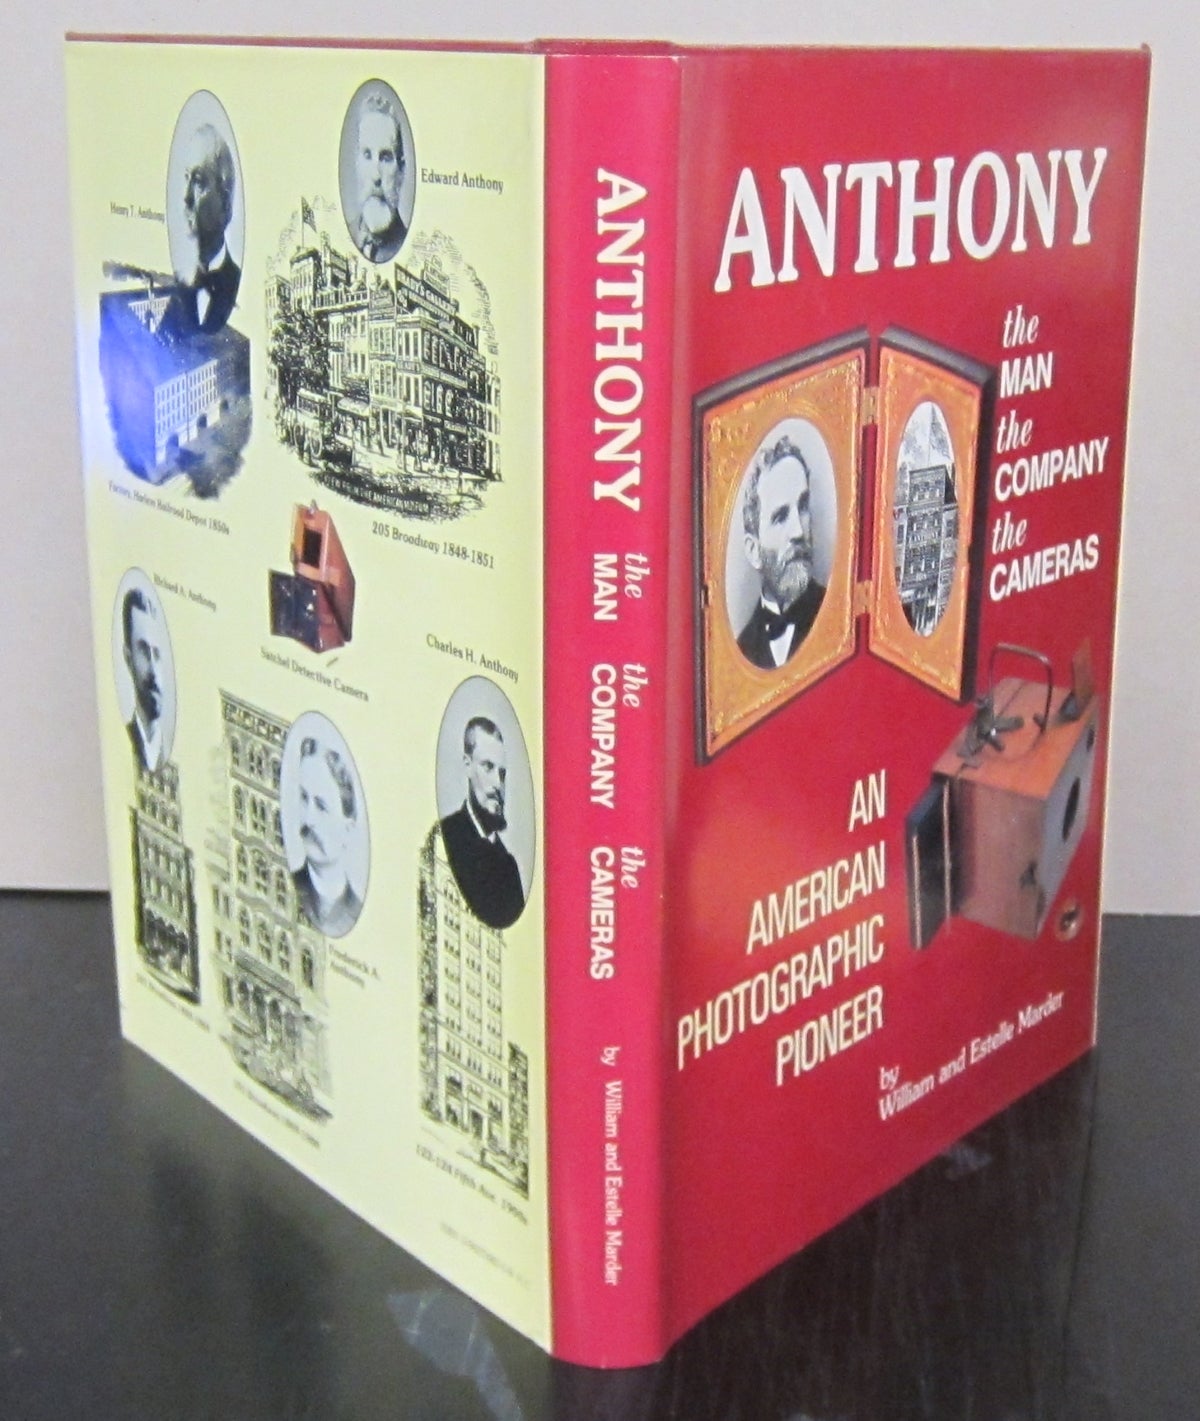 Anthony: The Man, the Company, the Cameras: An American